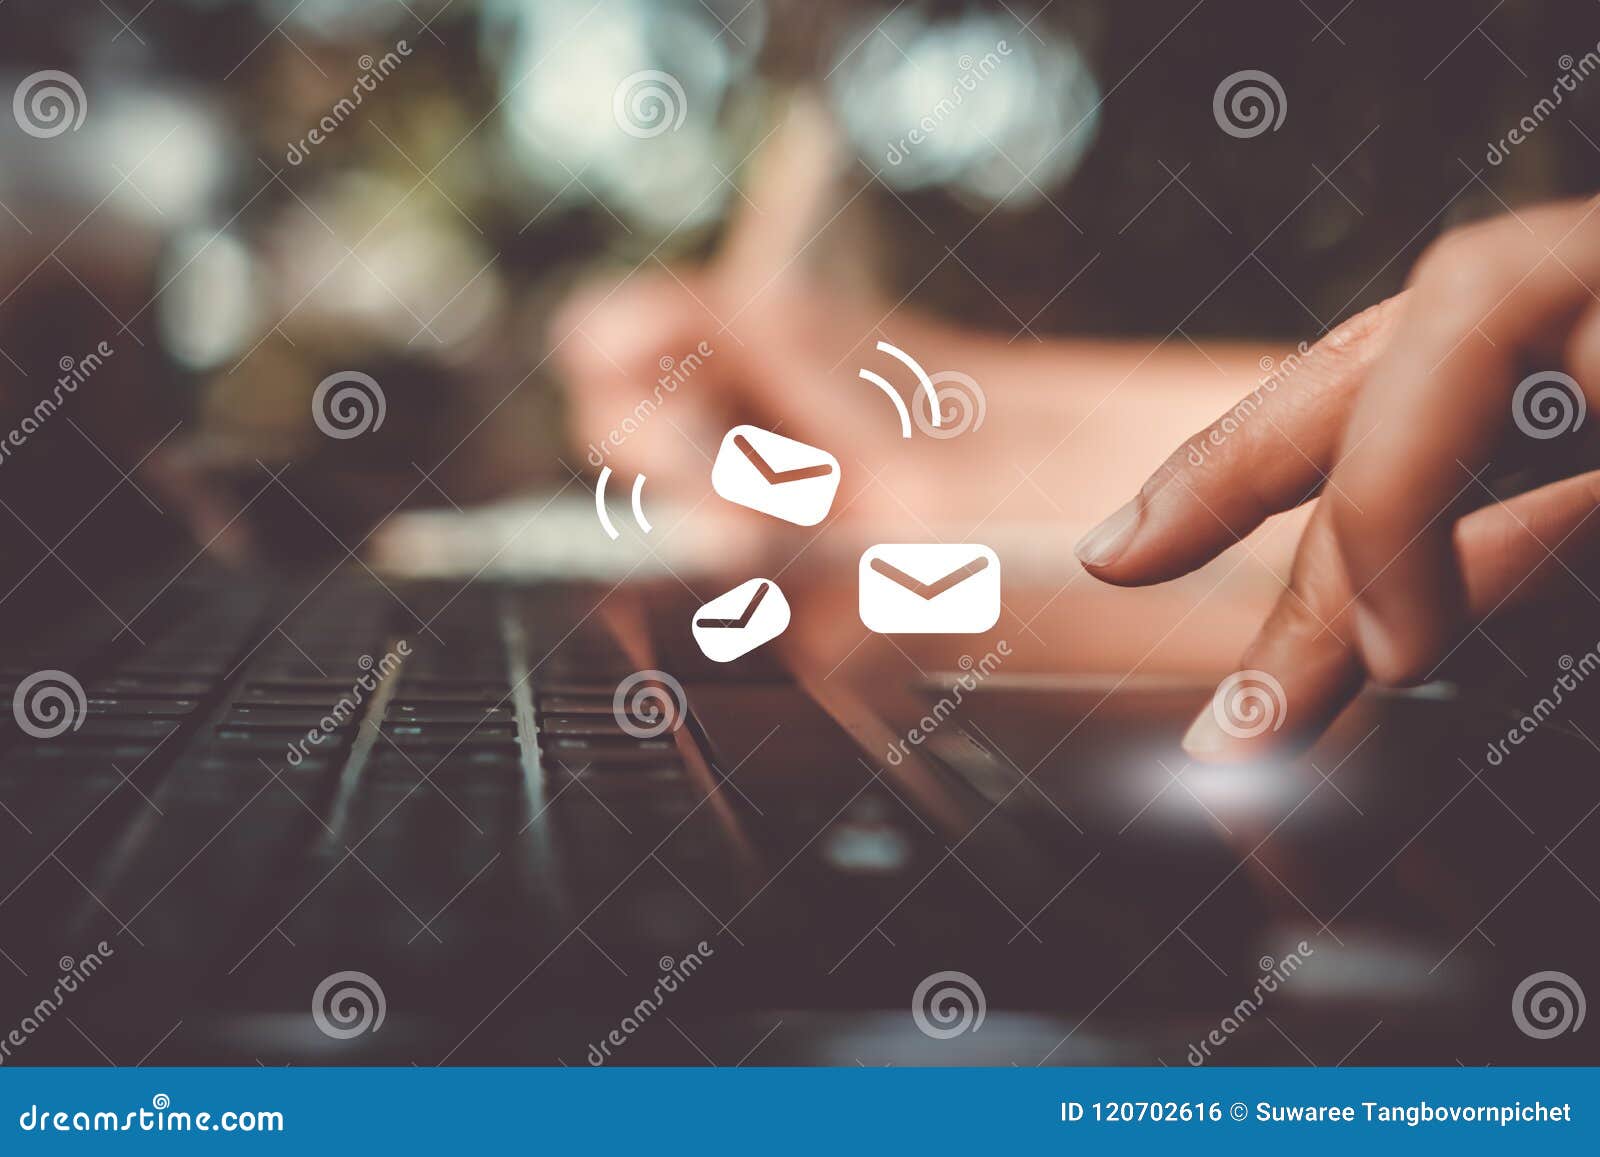 woman hand using laptop to send and recieve email